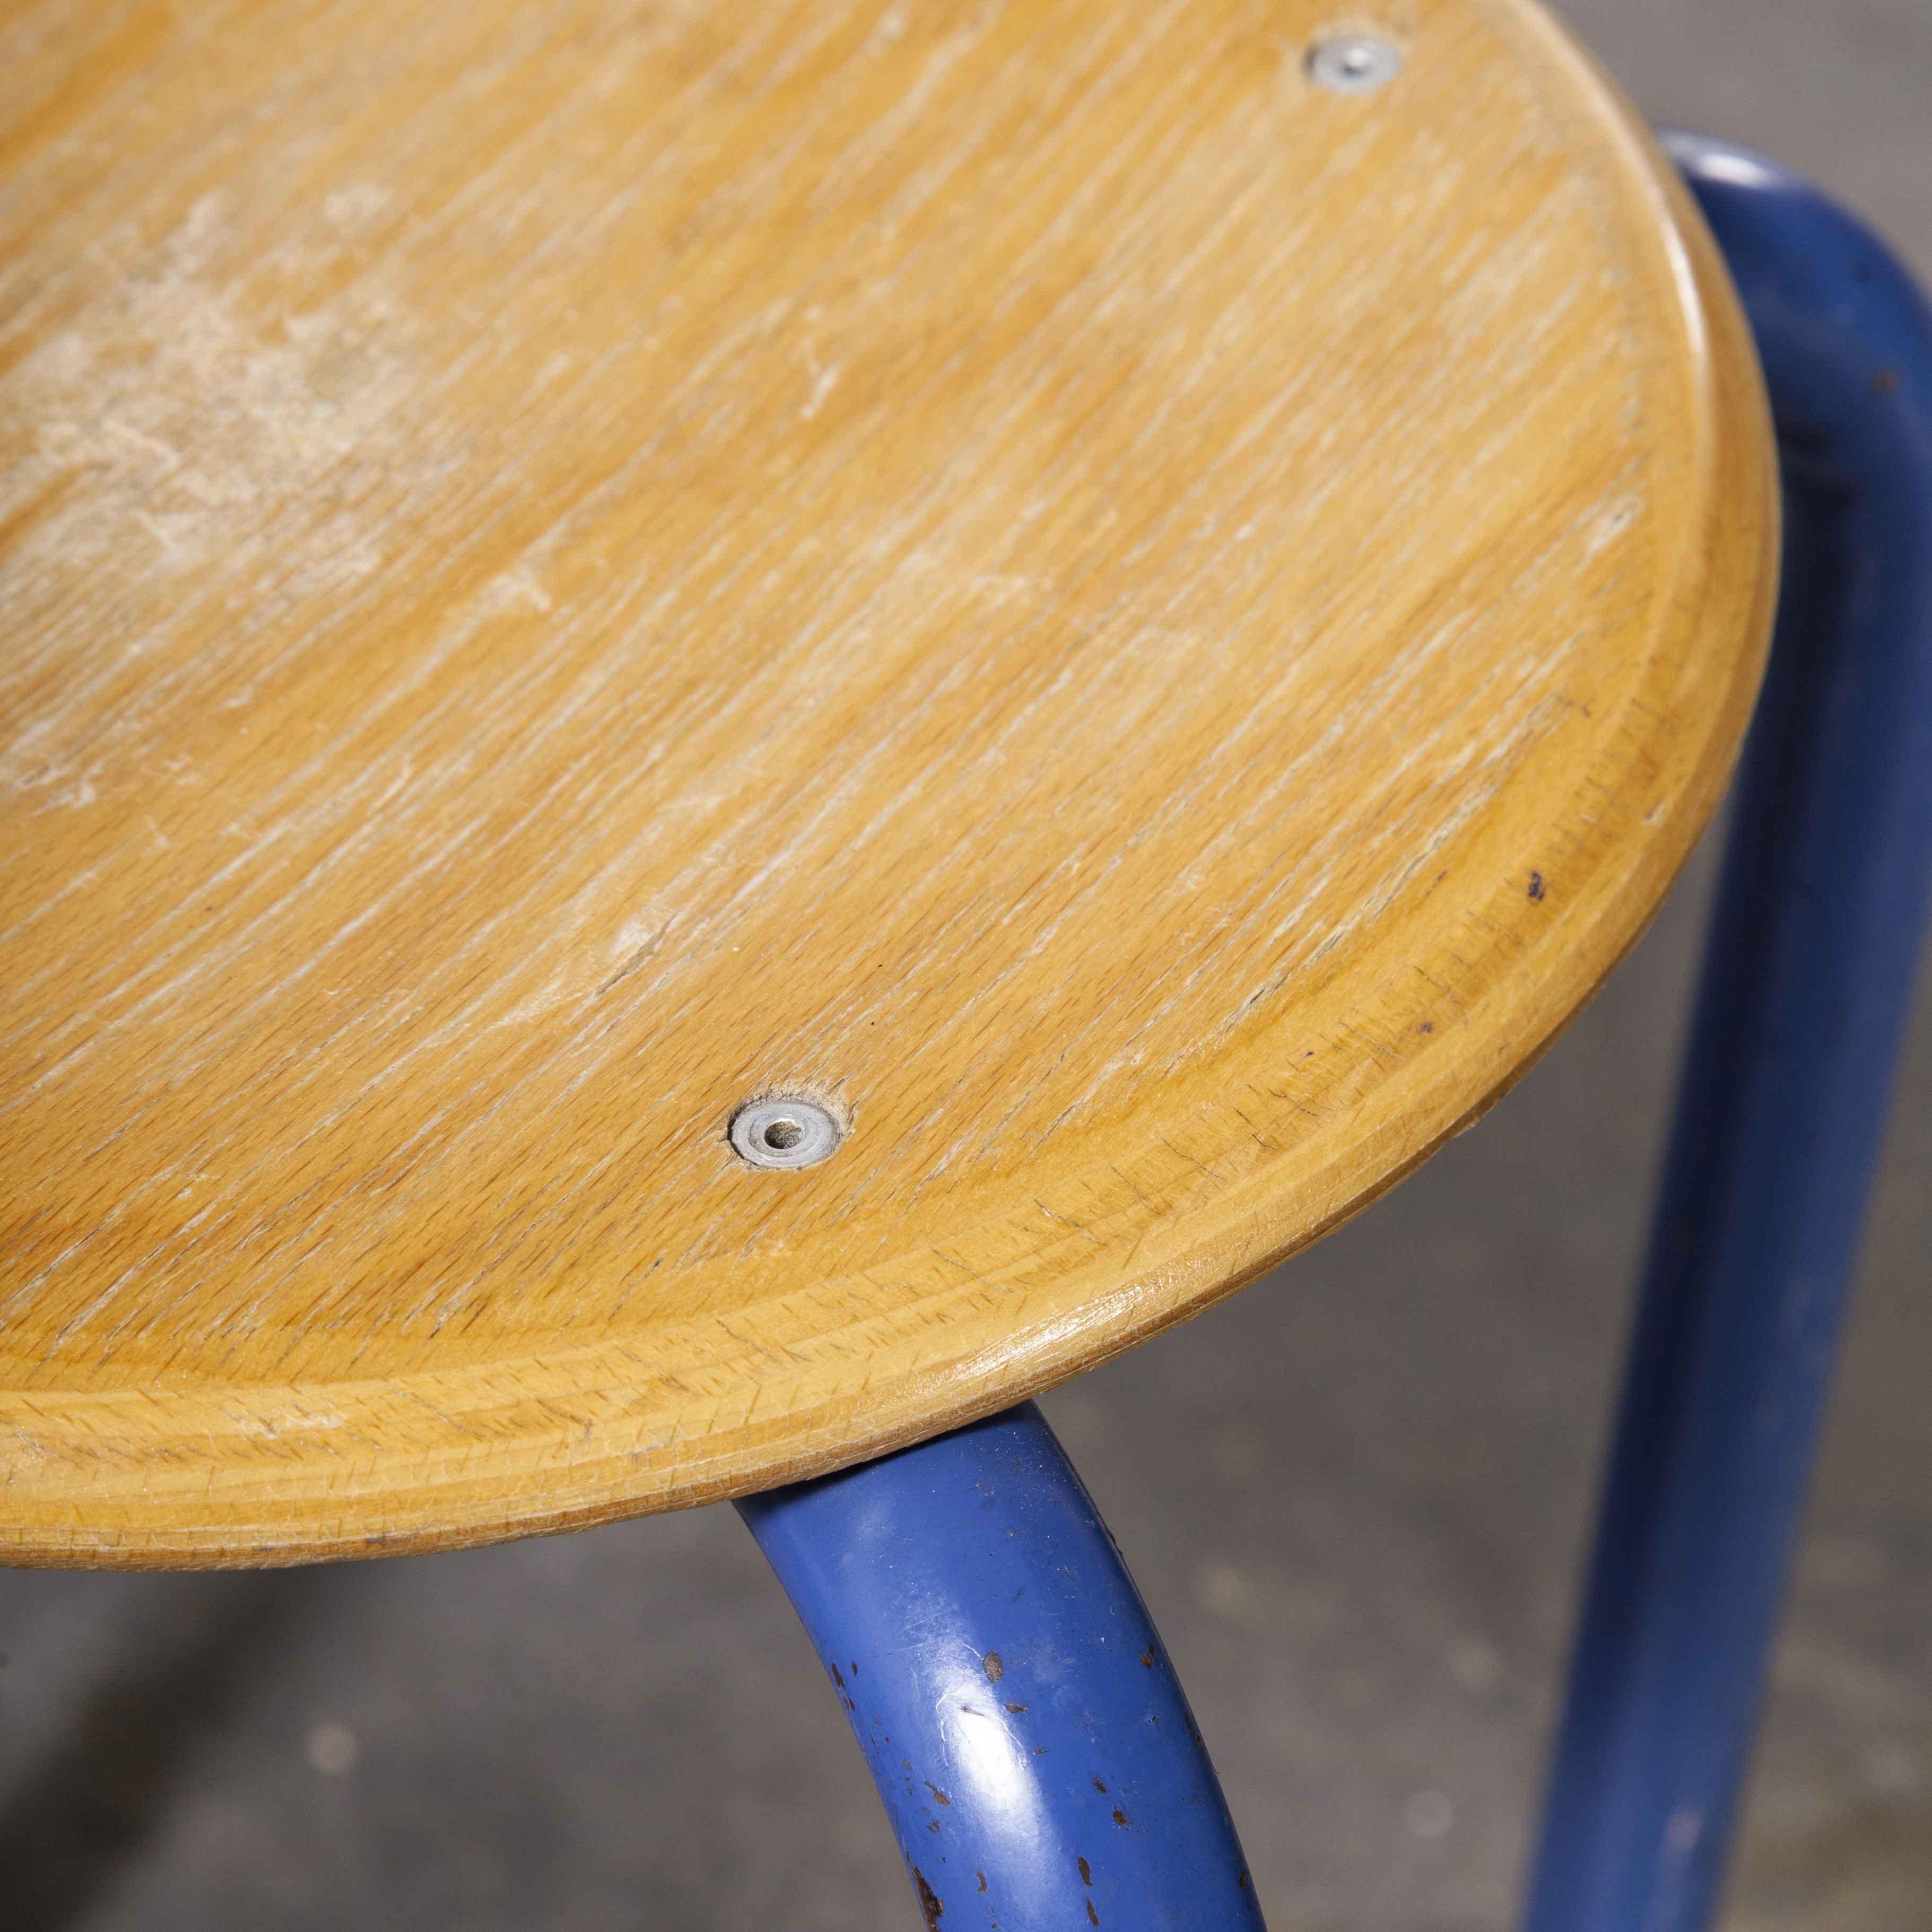 1960’s Simple French stacking school stools – Blue – Various quantities available

1960’s Simple French stacking school stools – Blue – Various quantities available. Classic French school stools, solid beech laminated tops with strong metal bases.